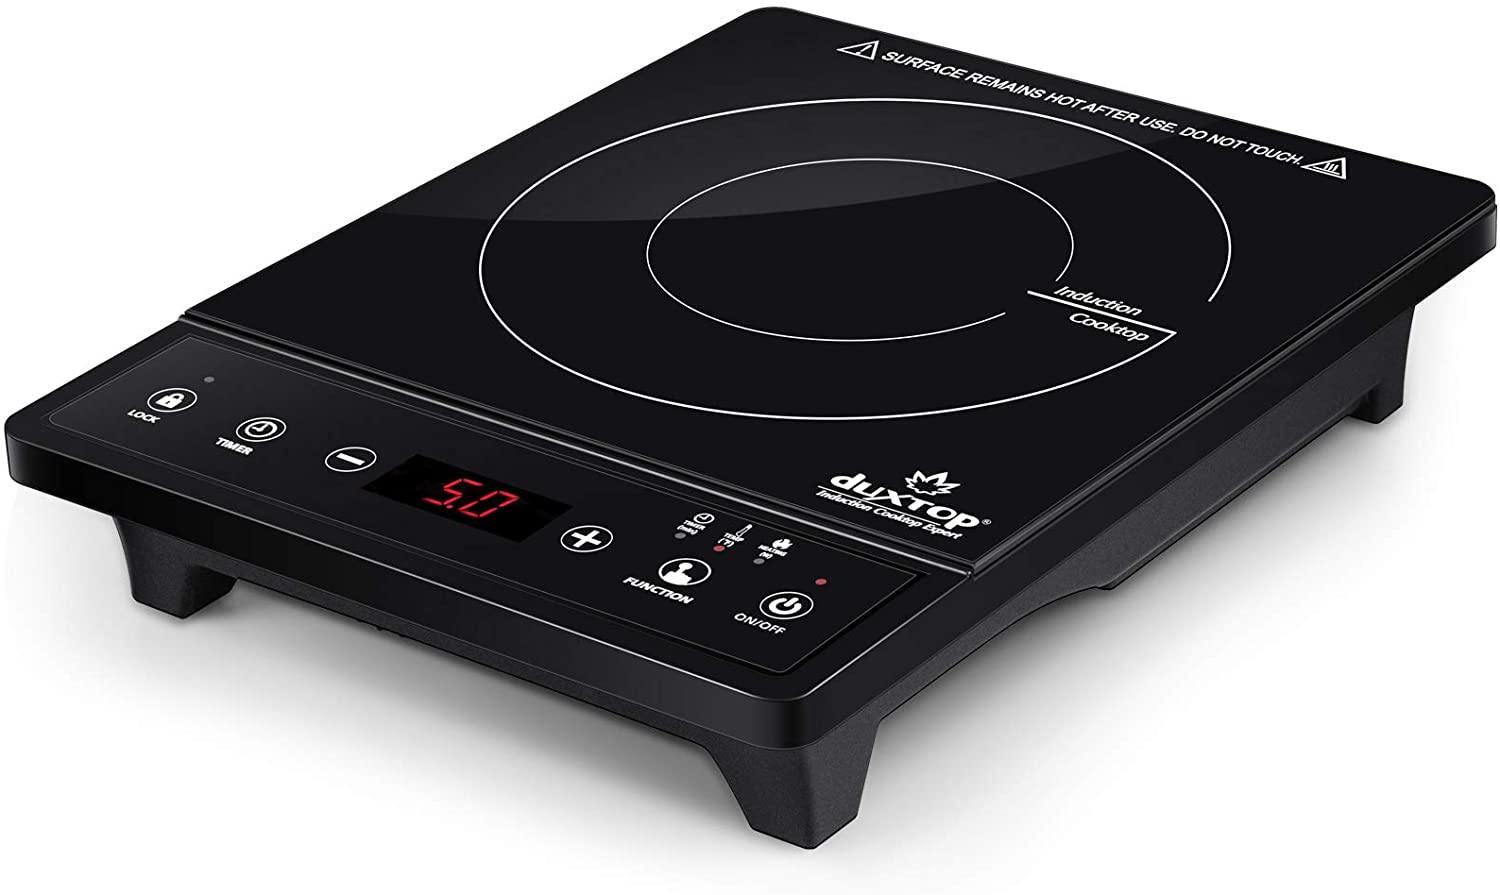 Duxtop LCD 1800W Portable Induction Cooktop 2 Burner, Built-In Countertop Burners with Sensor Touch Control, Electric Cooktop with 2 Burner